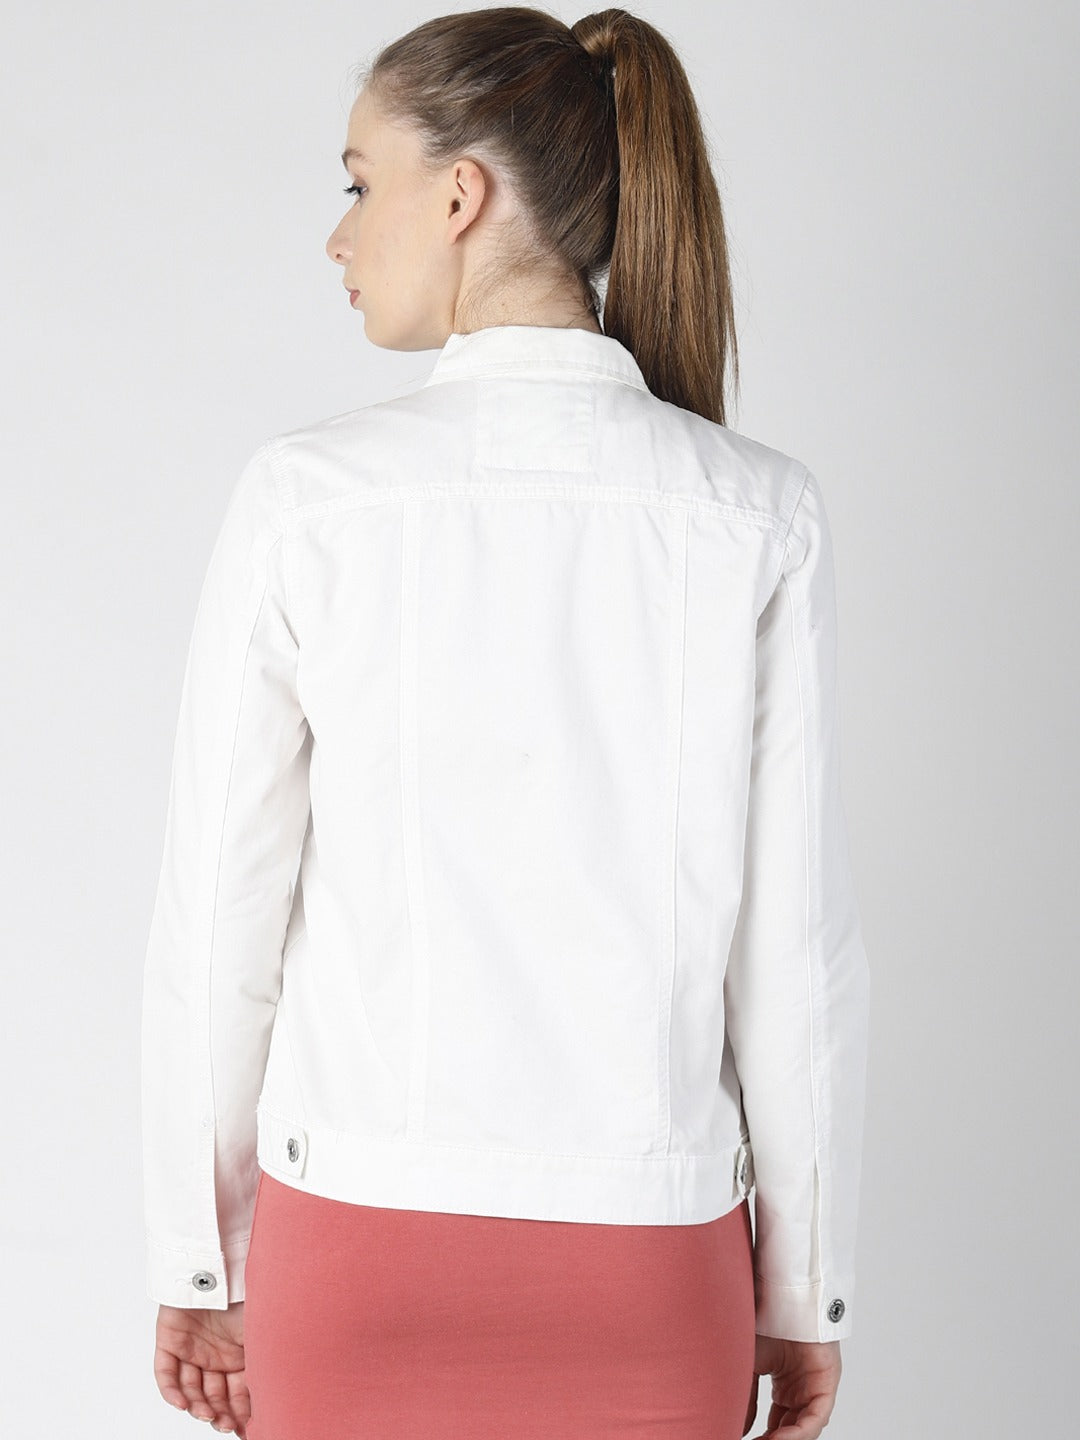 White denim jacket for women, featuring a solid color design, perfect for casual or smart-casual outfits.